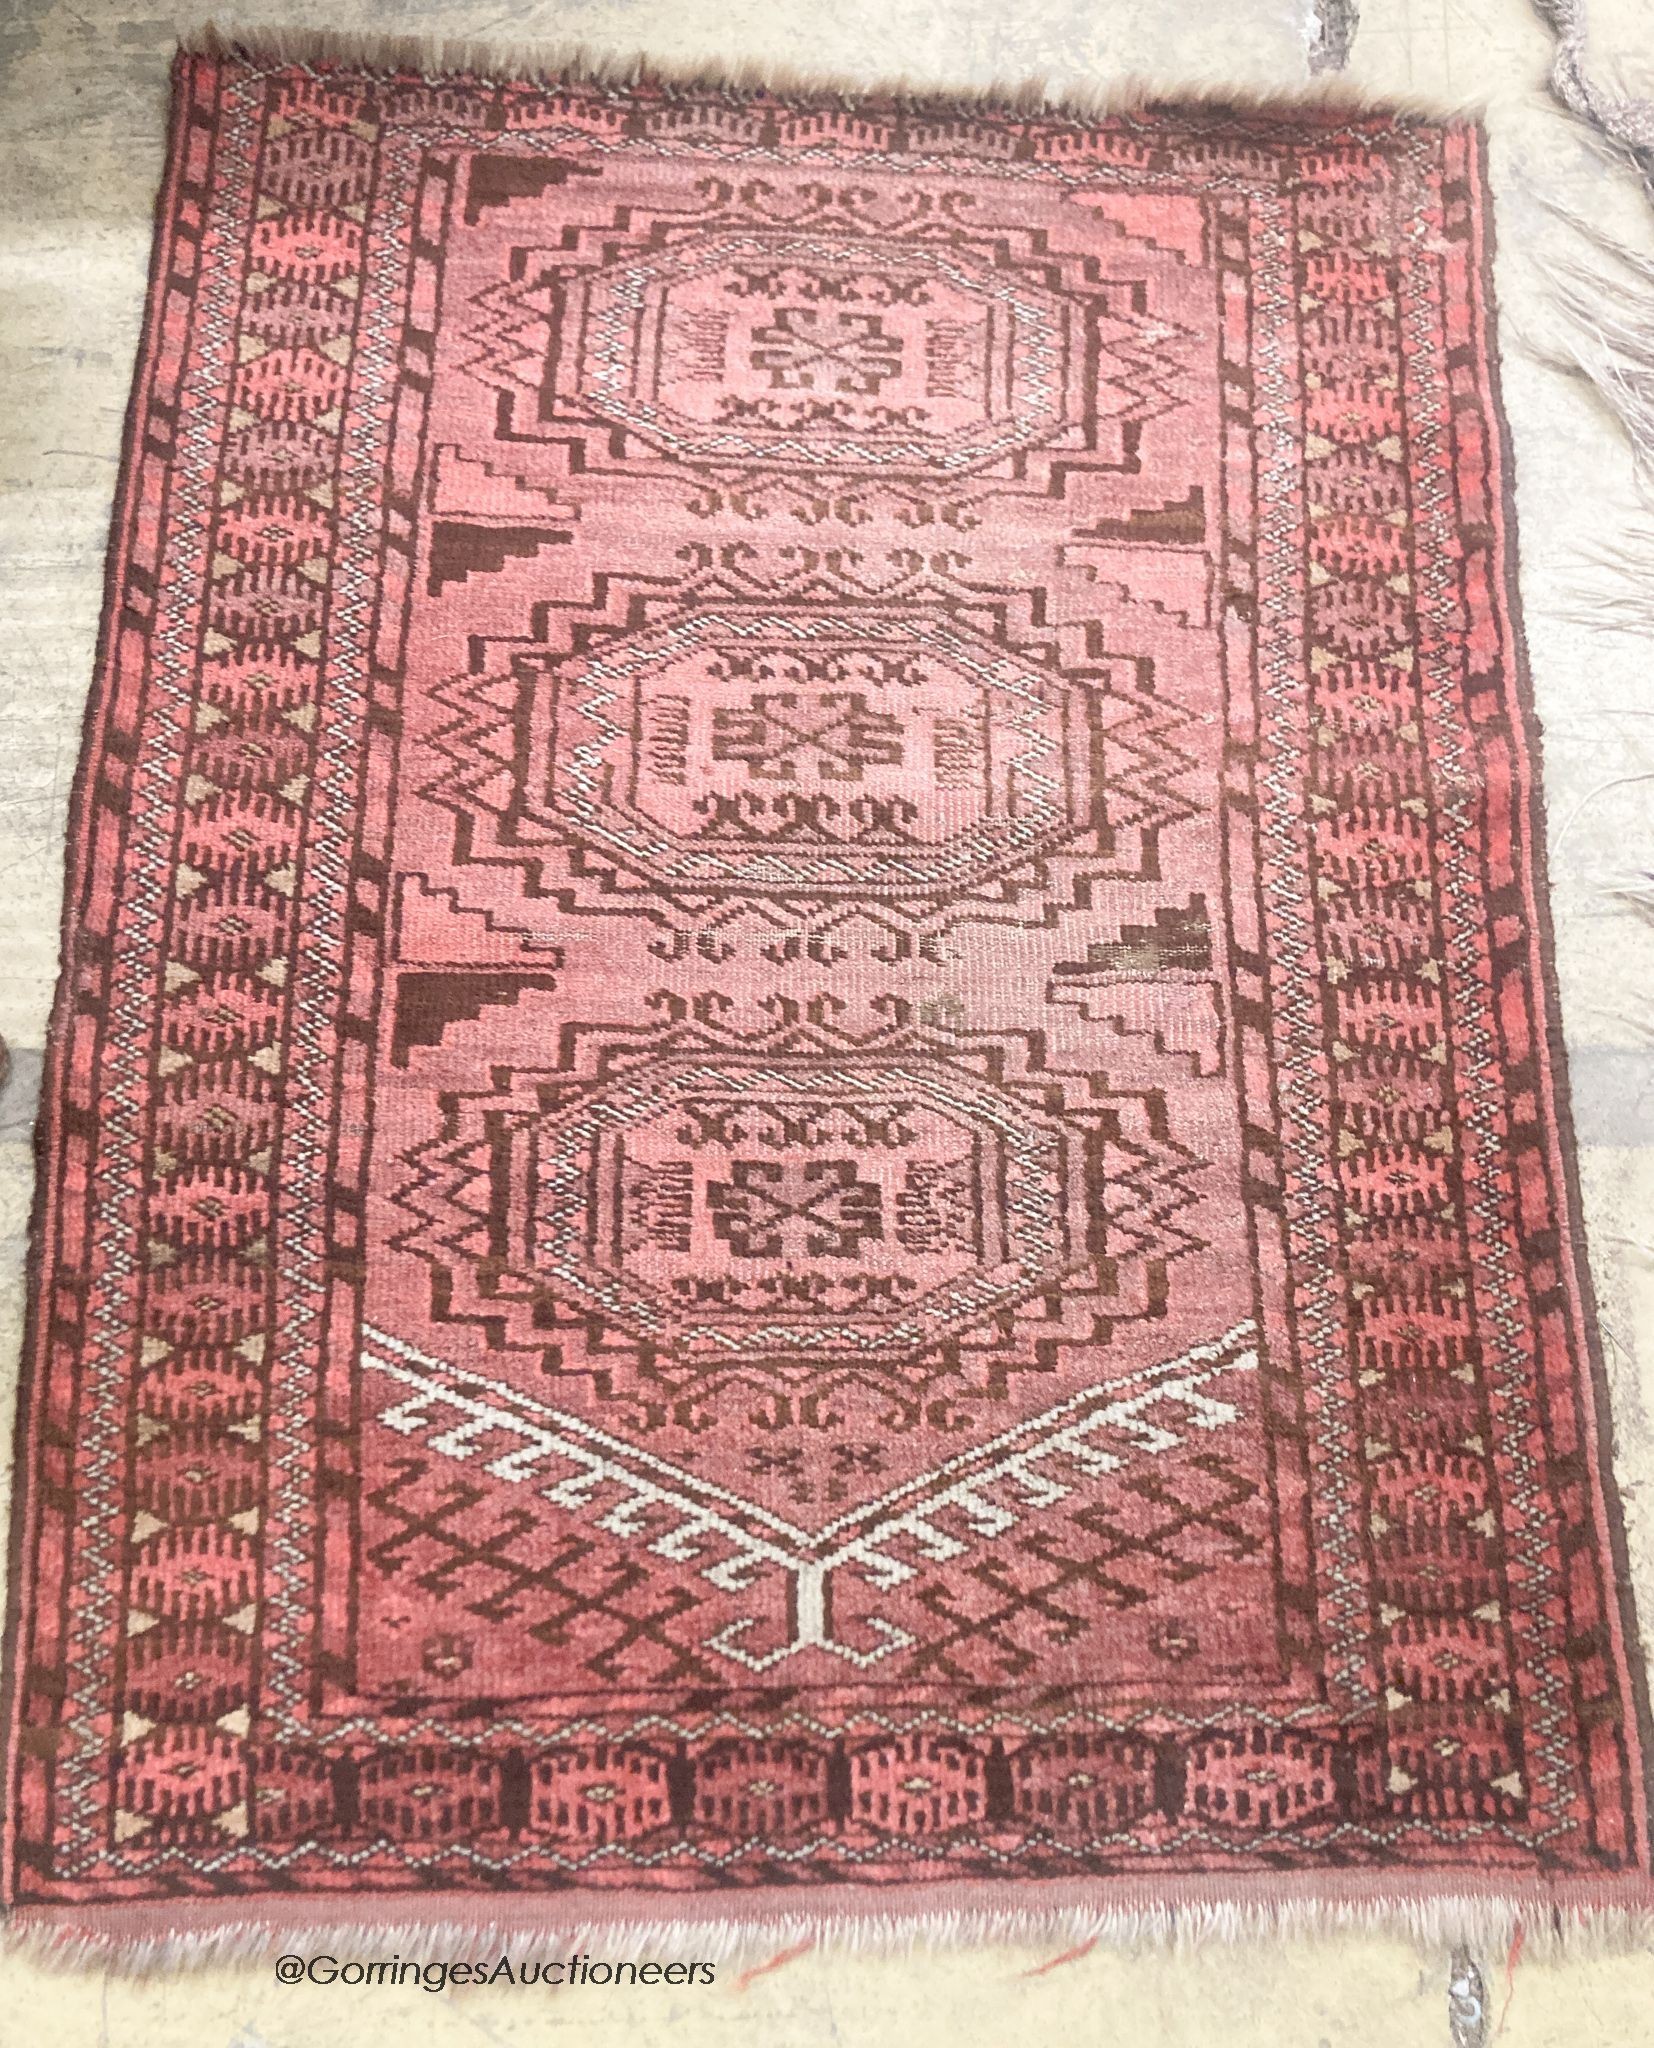 A polychrome flatweave geometric rug, 240 x 124cm together with a smaller Bokhara rug